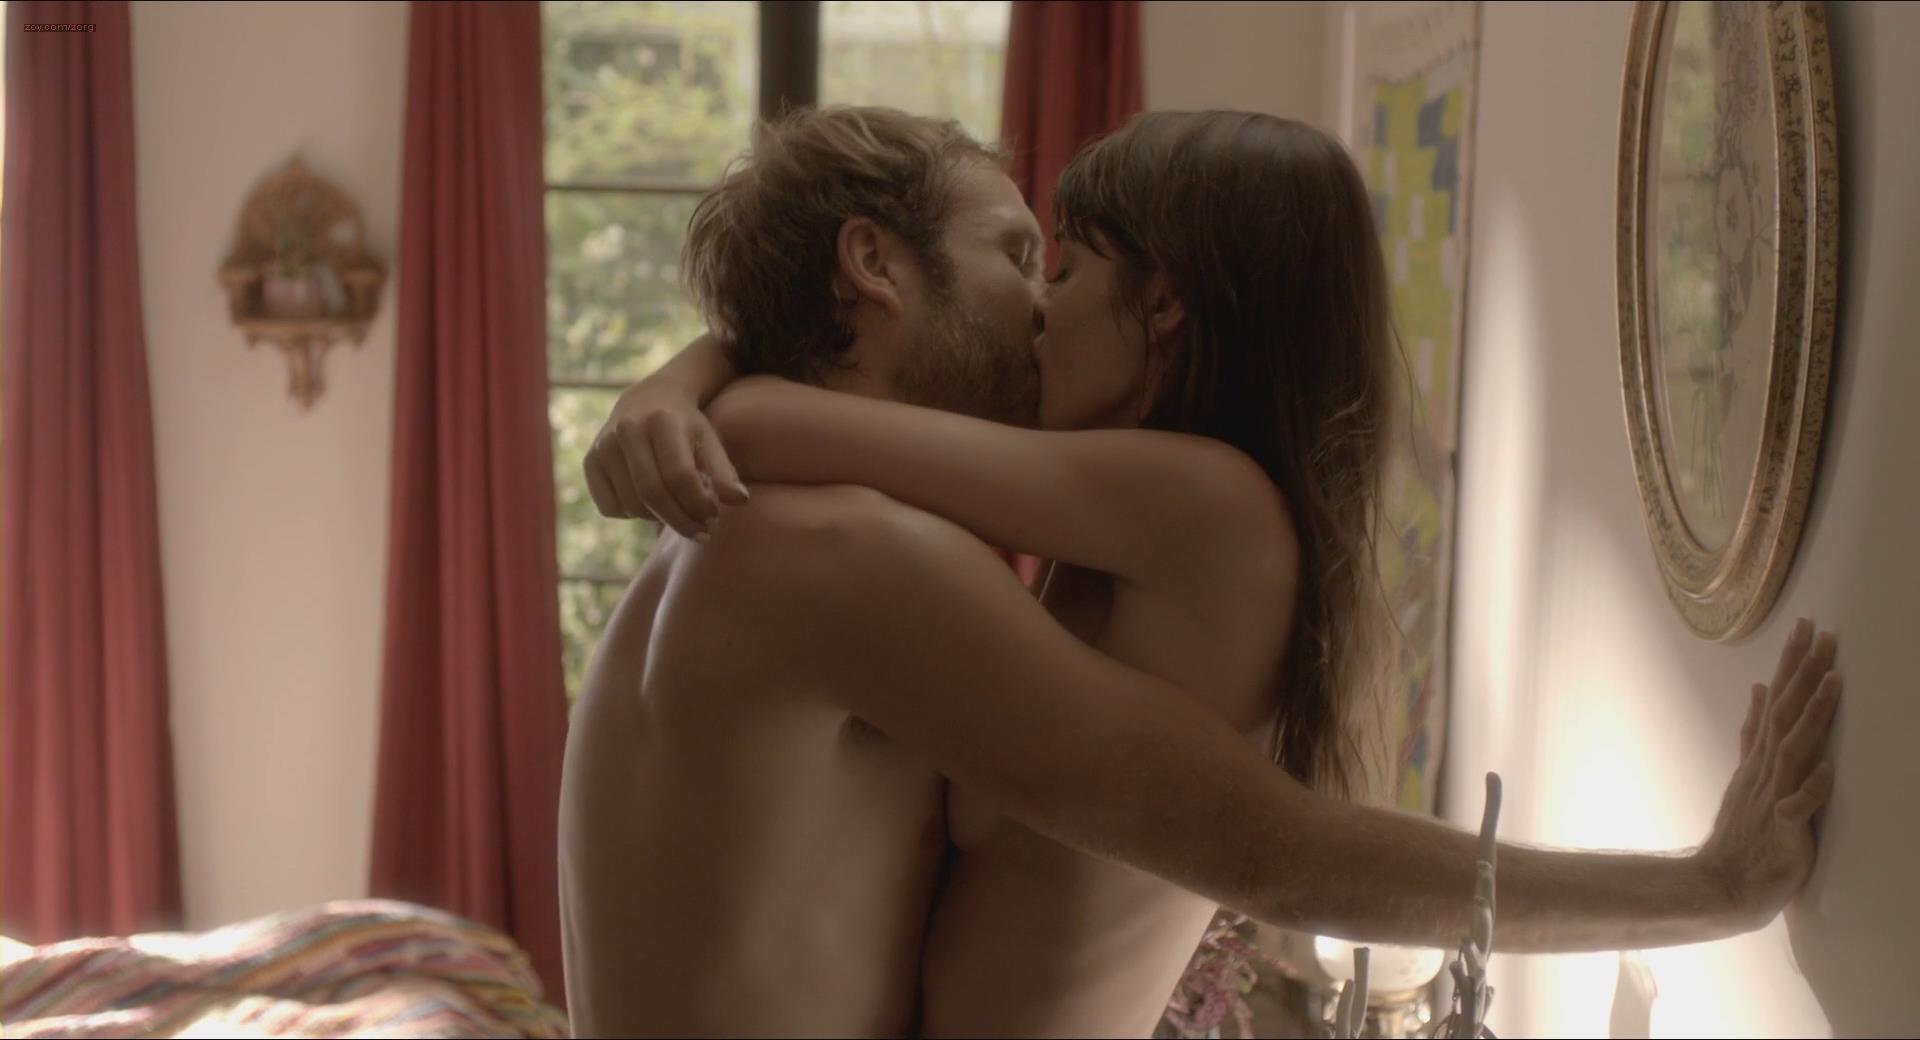 Lizzy Caplan nude but mostly covered in steamy sex scene from - Save the Date (2012) hd1080p